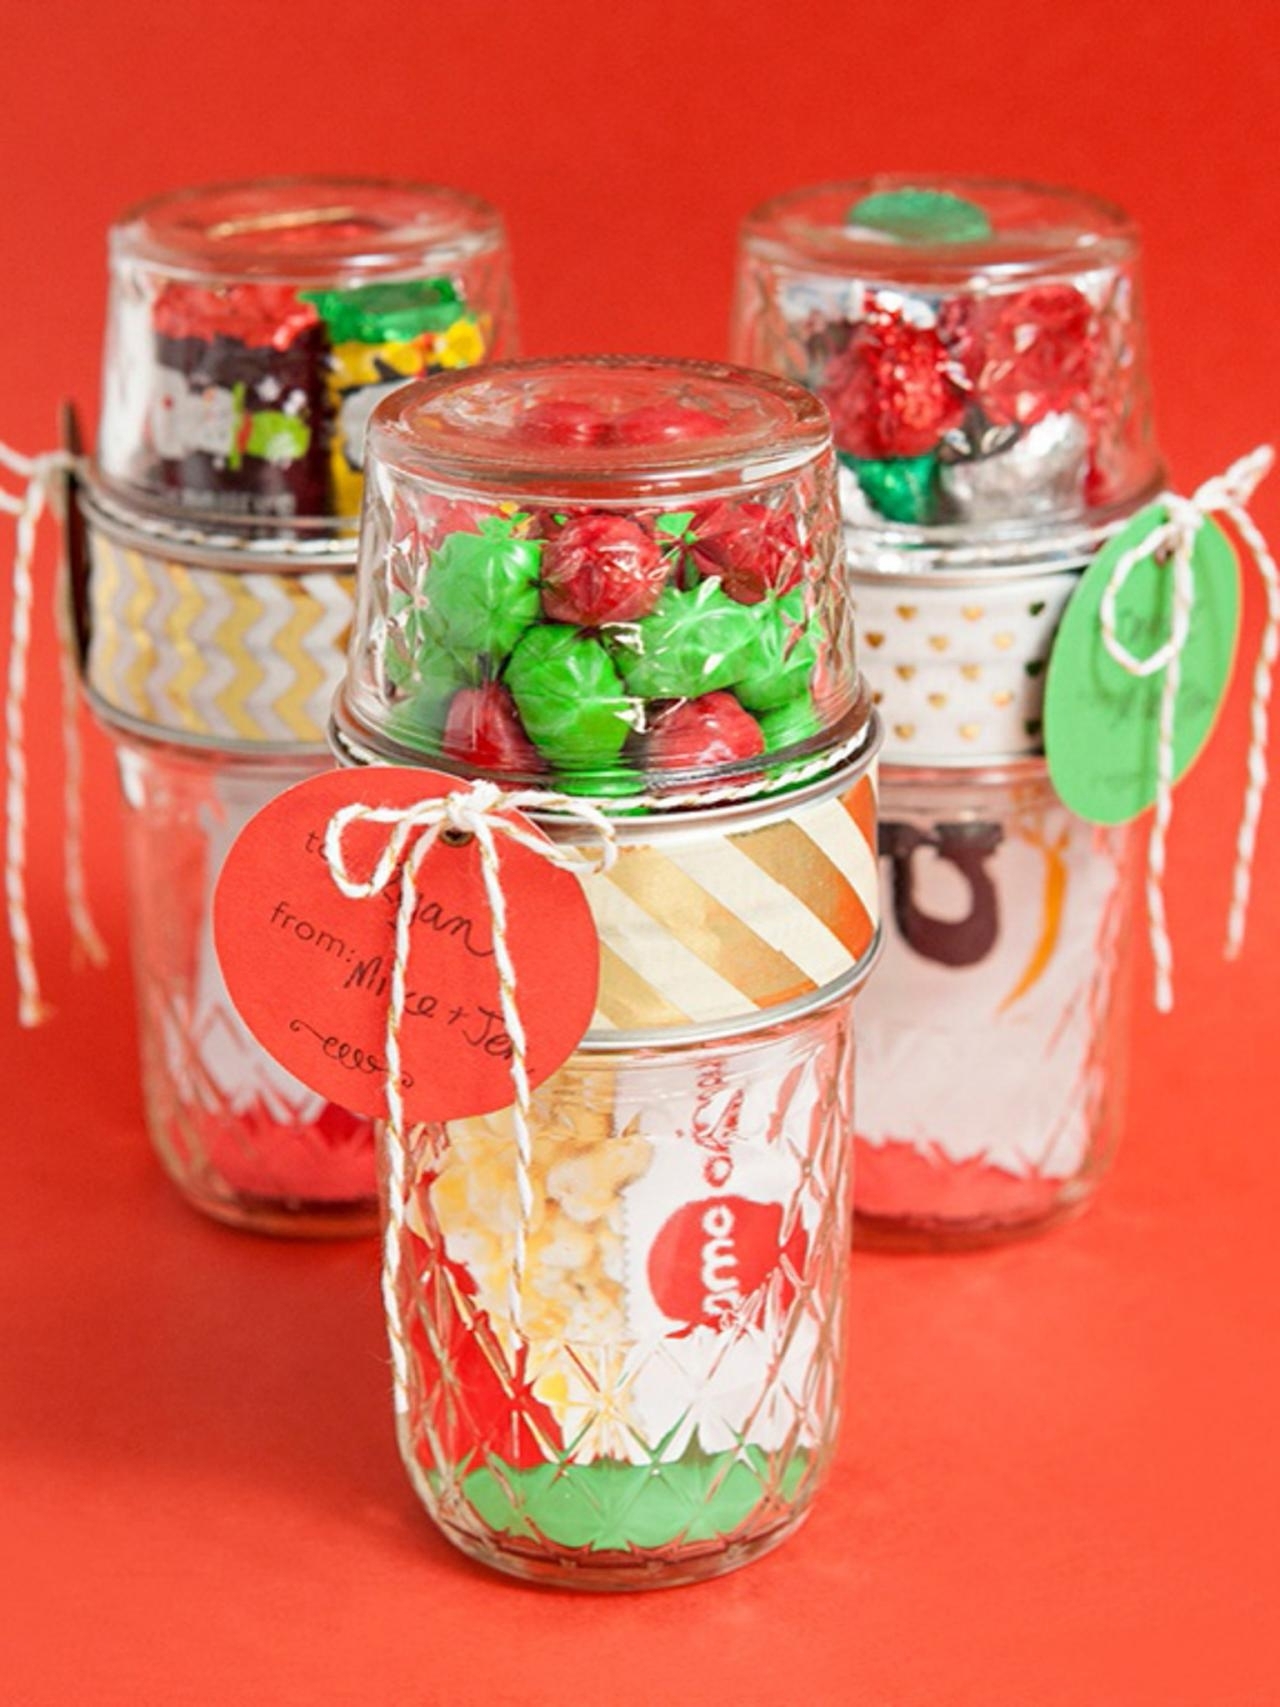 10 Perfect Gifts In A Jar Ideas For Christmas %name 2022